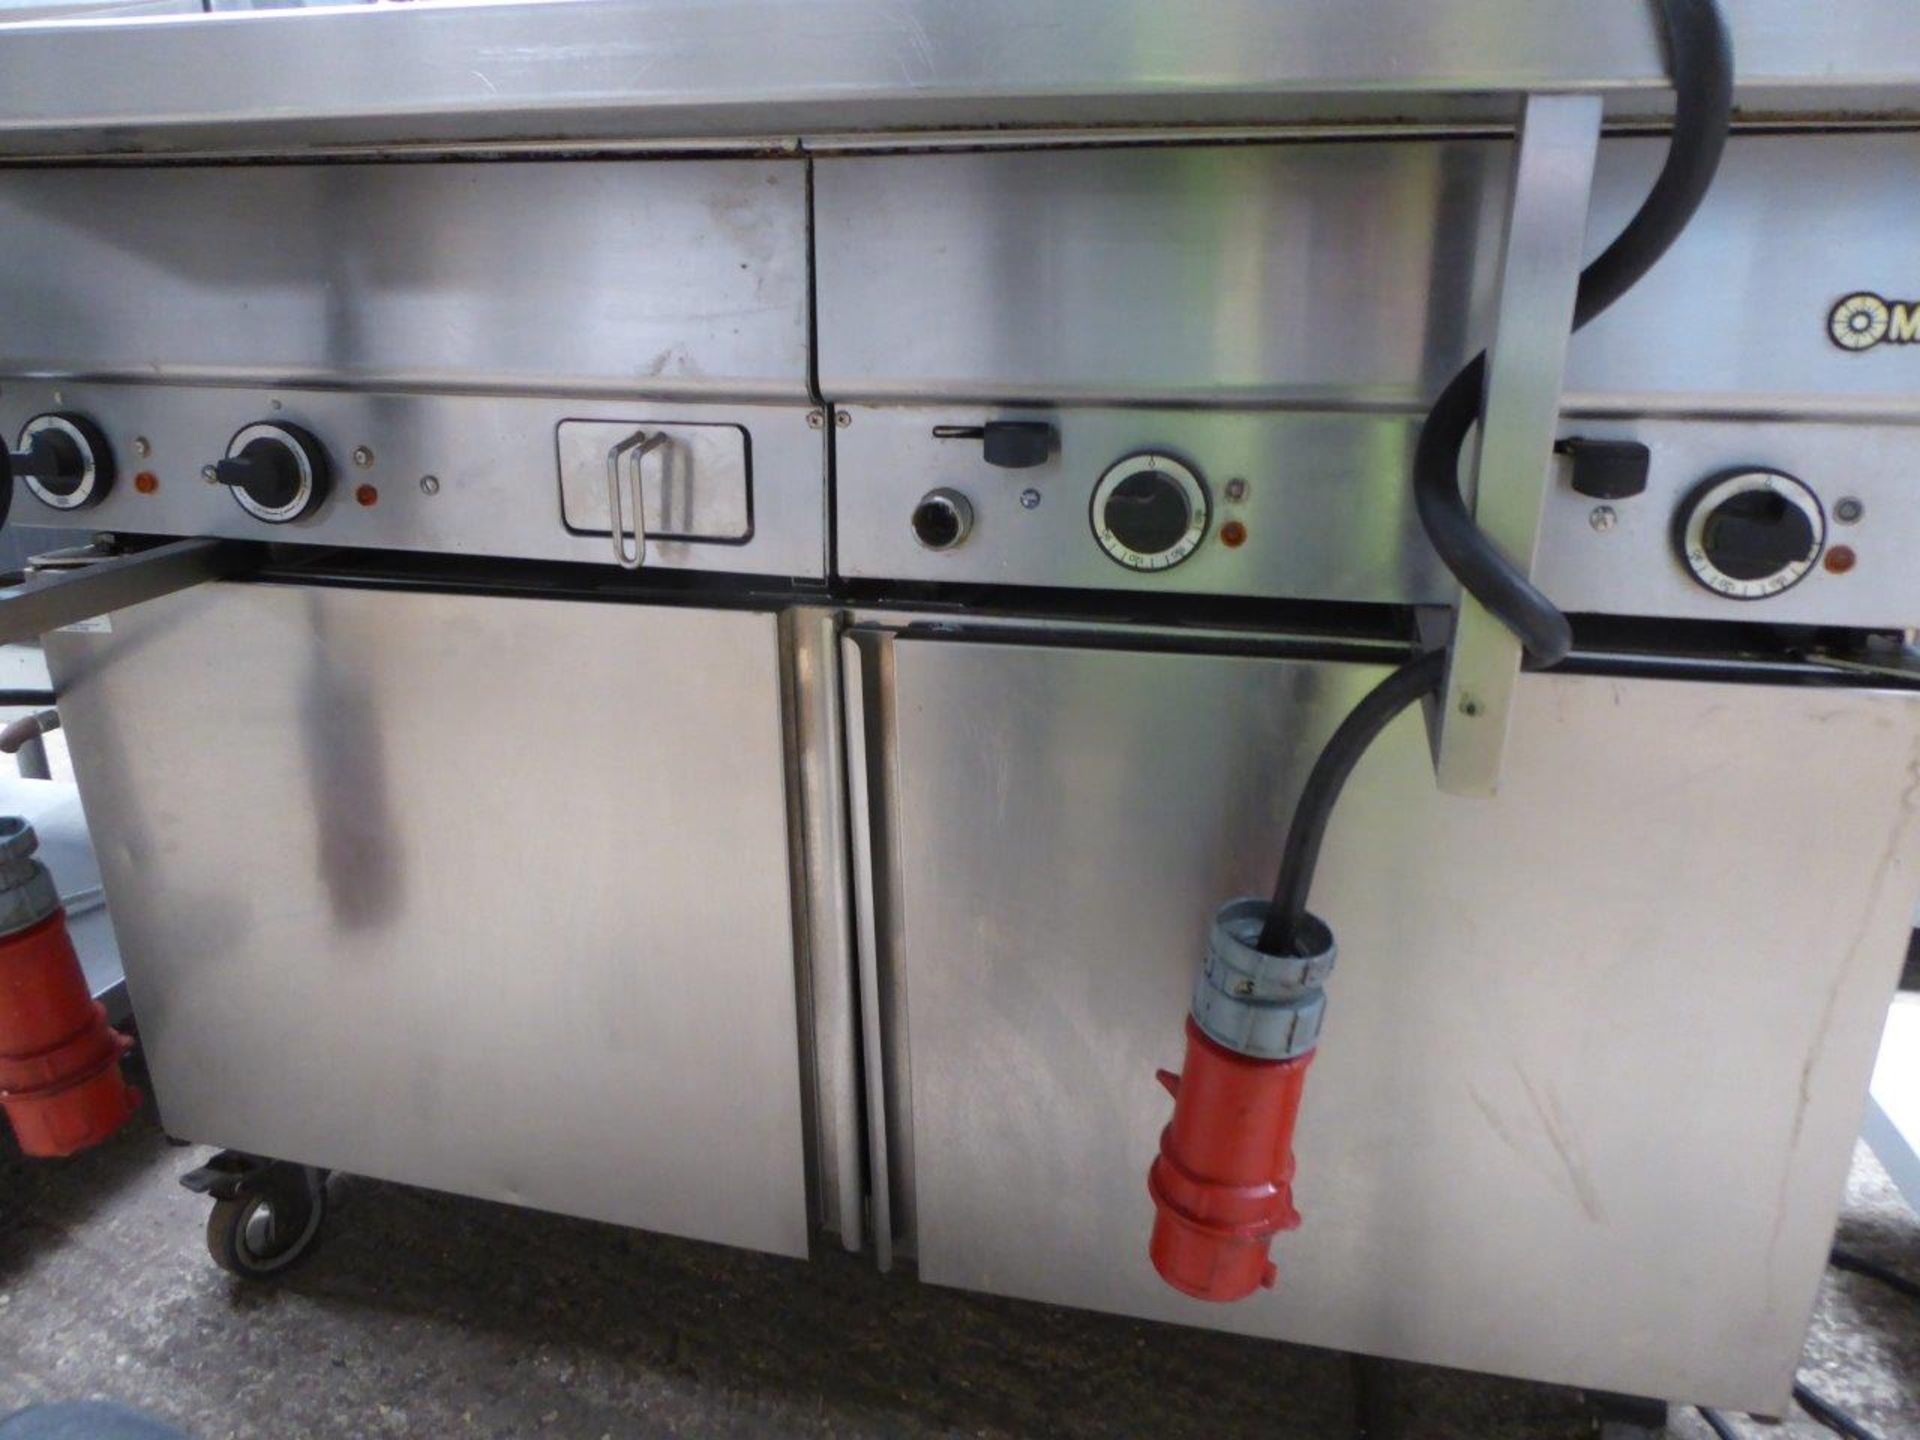 Double fryer and hot plate unit with under warmer. Estimate £450-480 - Image 4 of 4